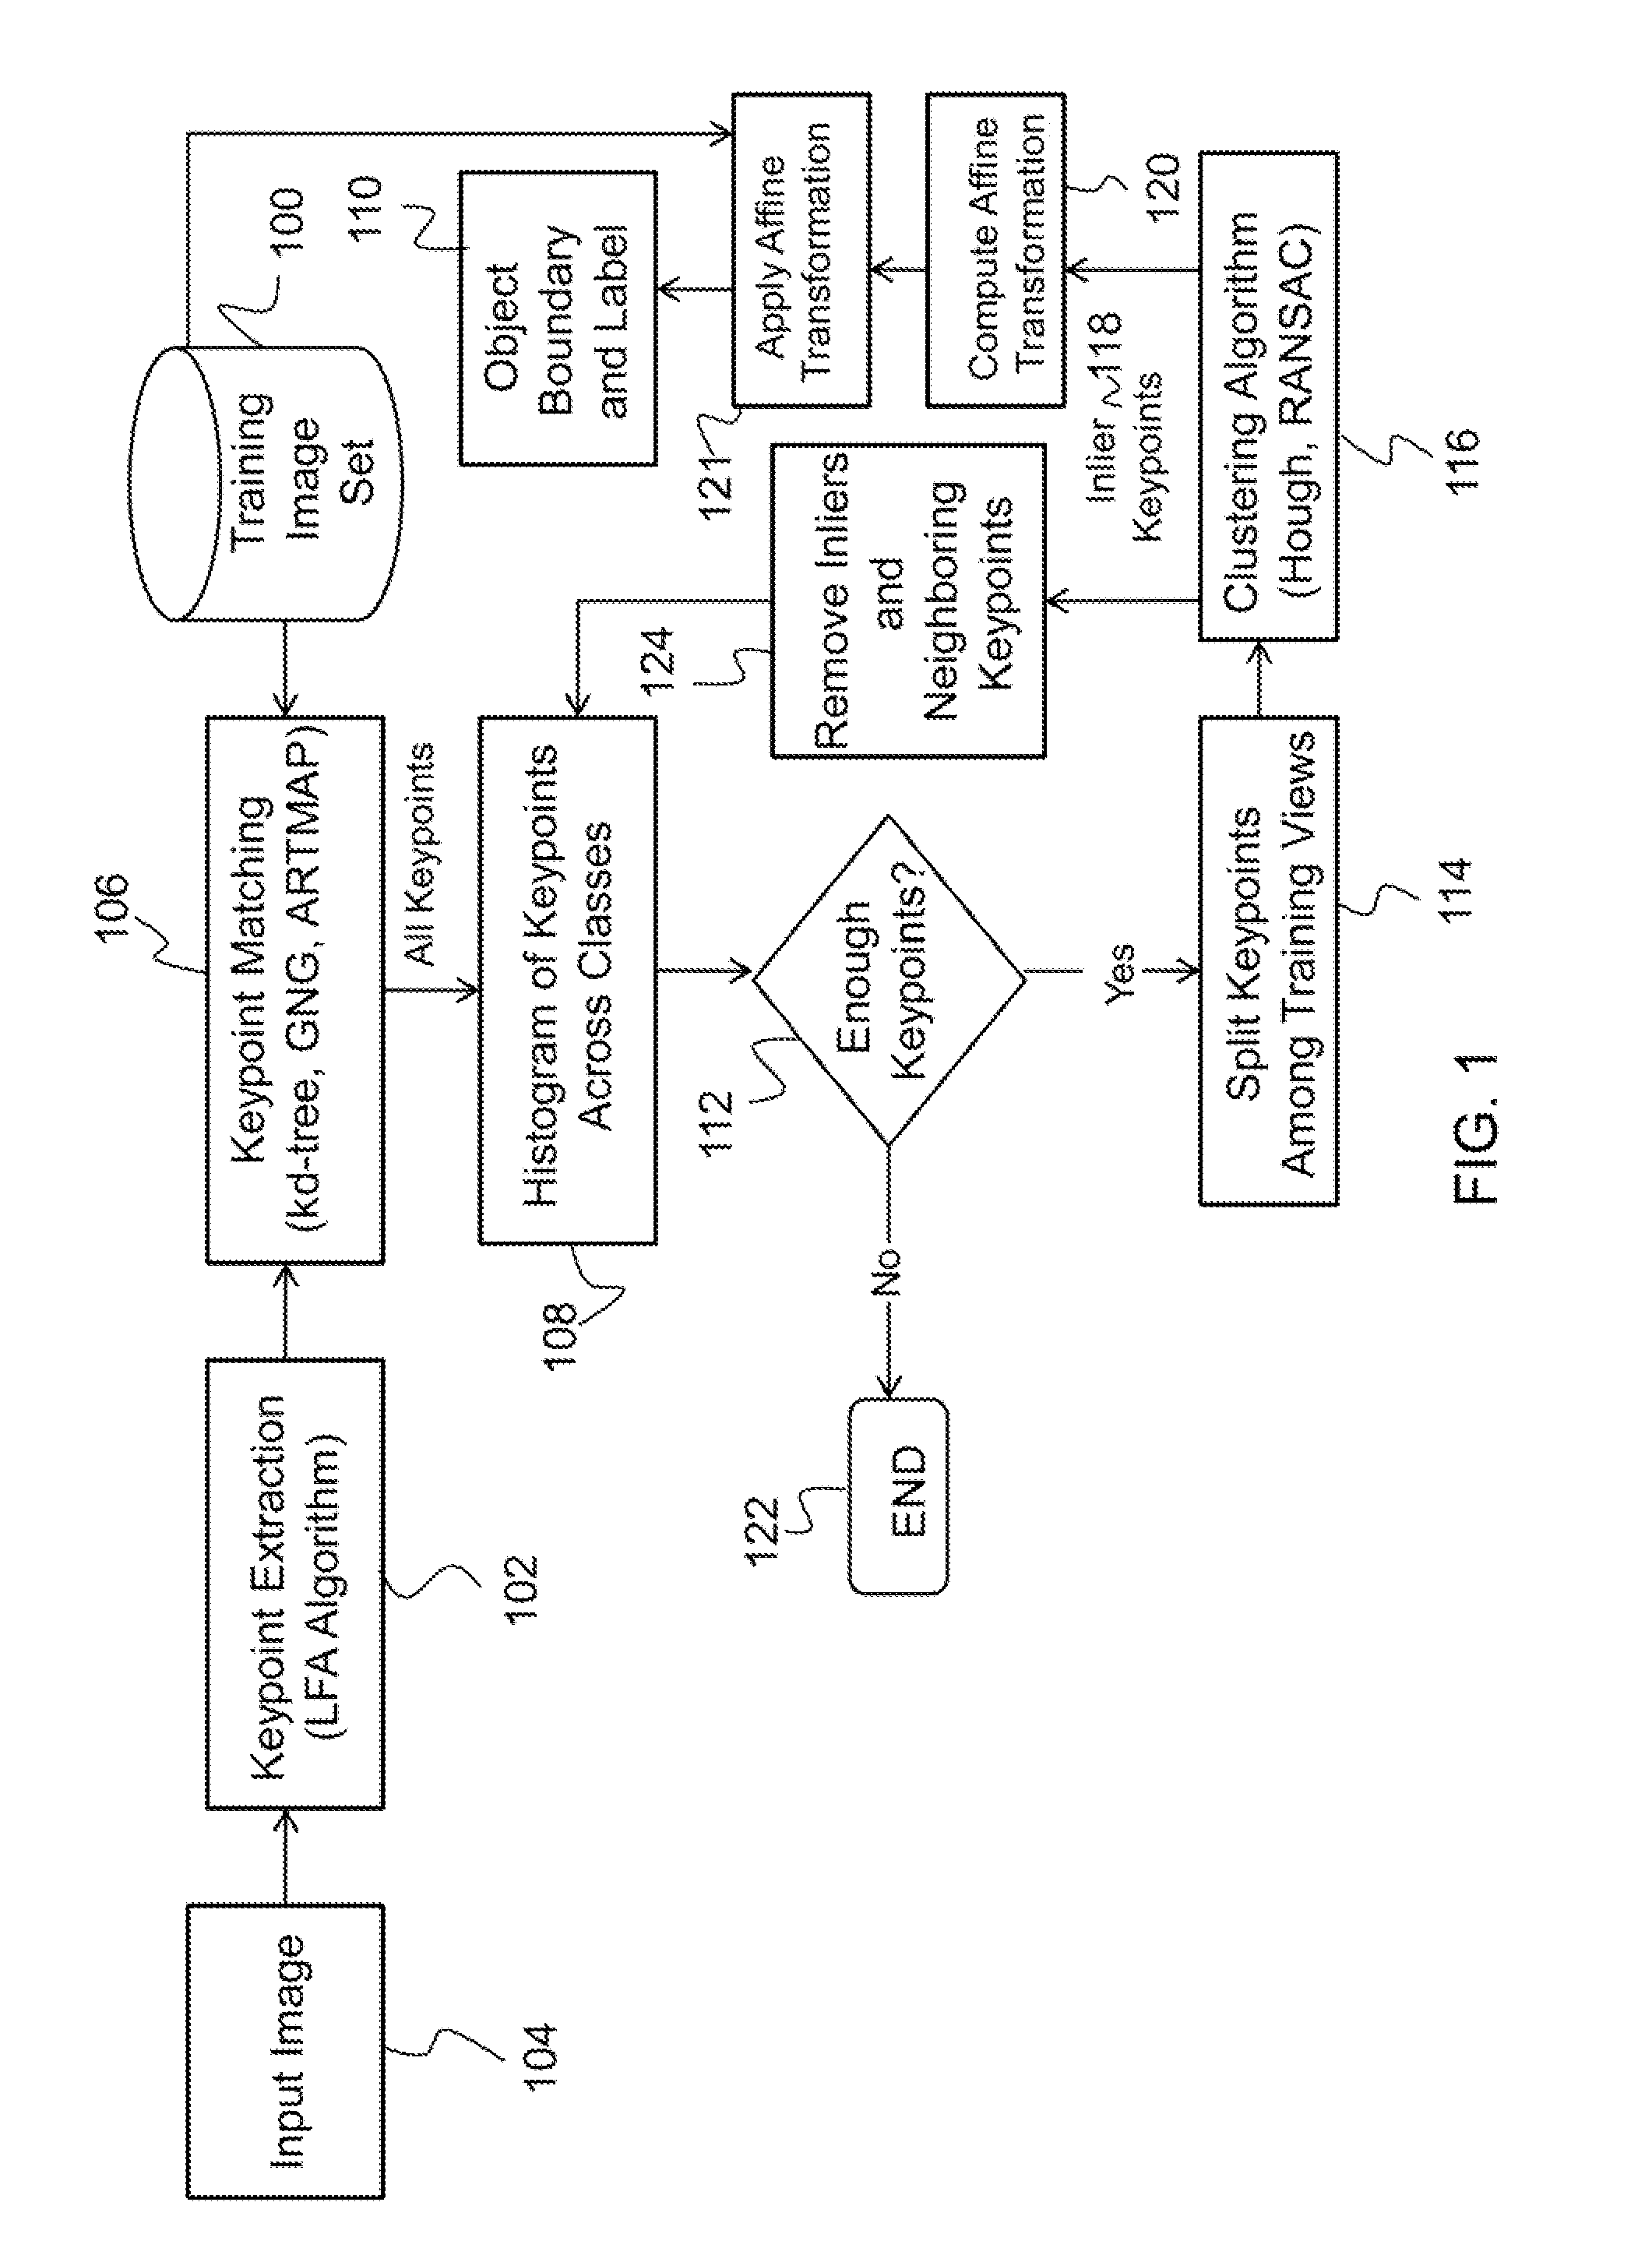 Method for recognition and pose estimation of multiple occurrences of multiple objects in visual images